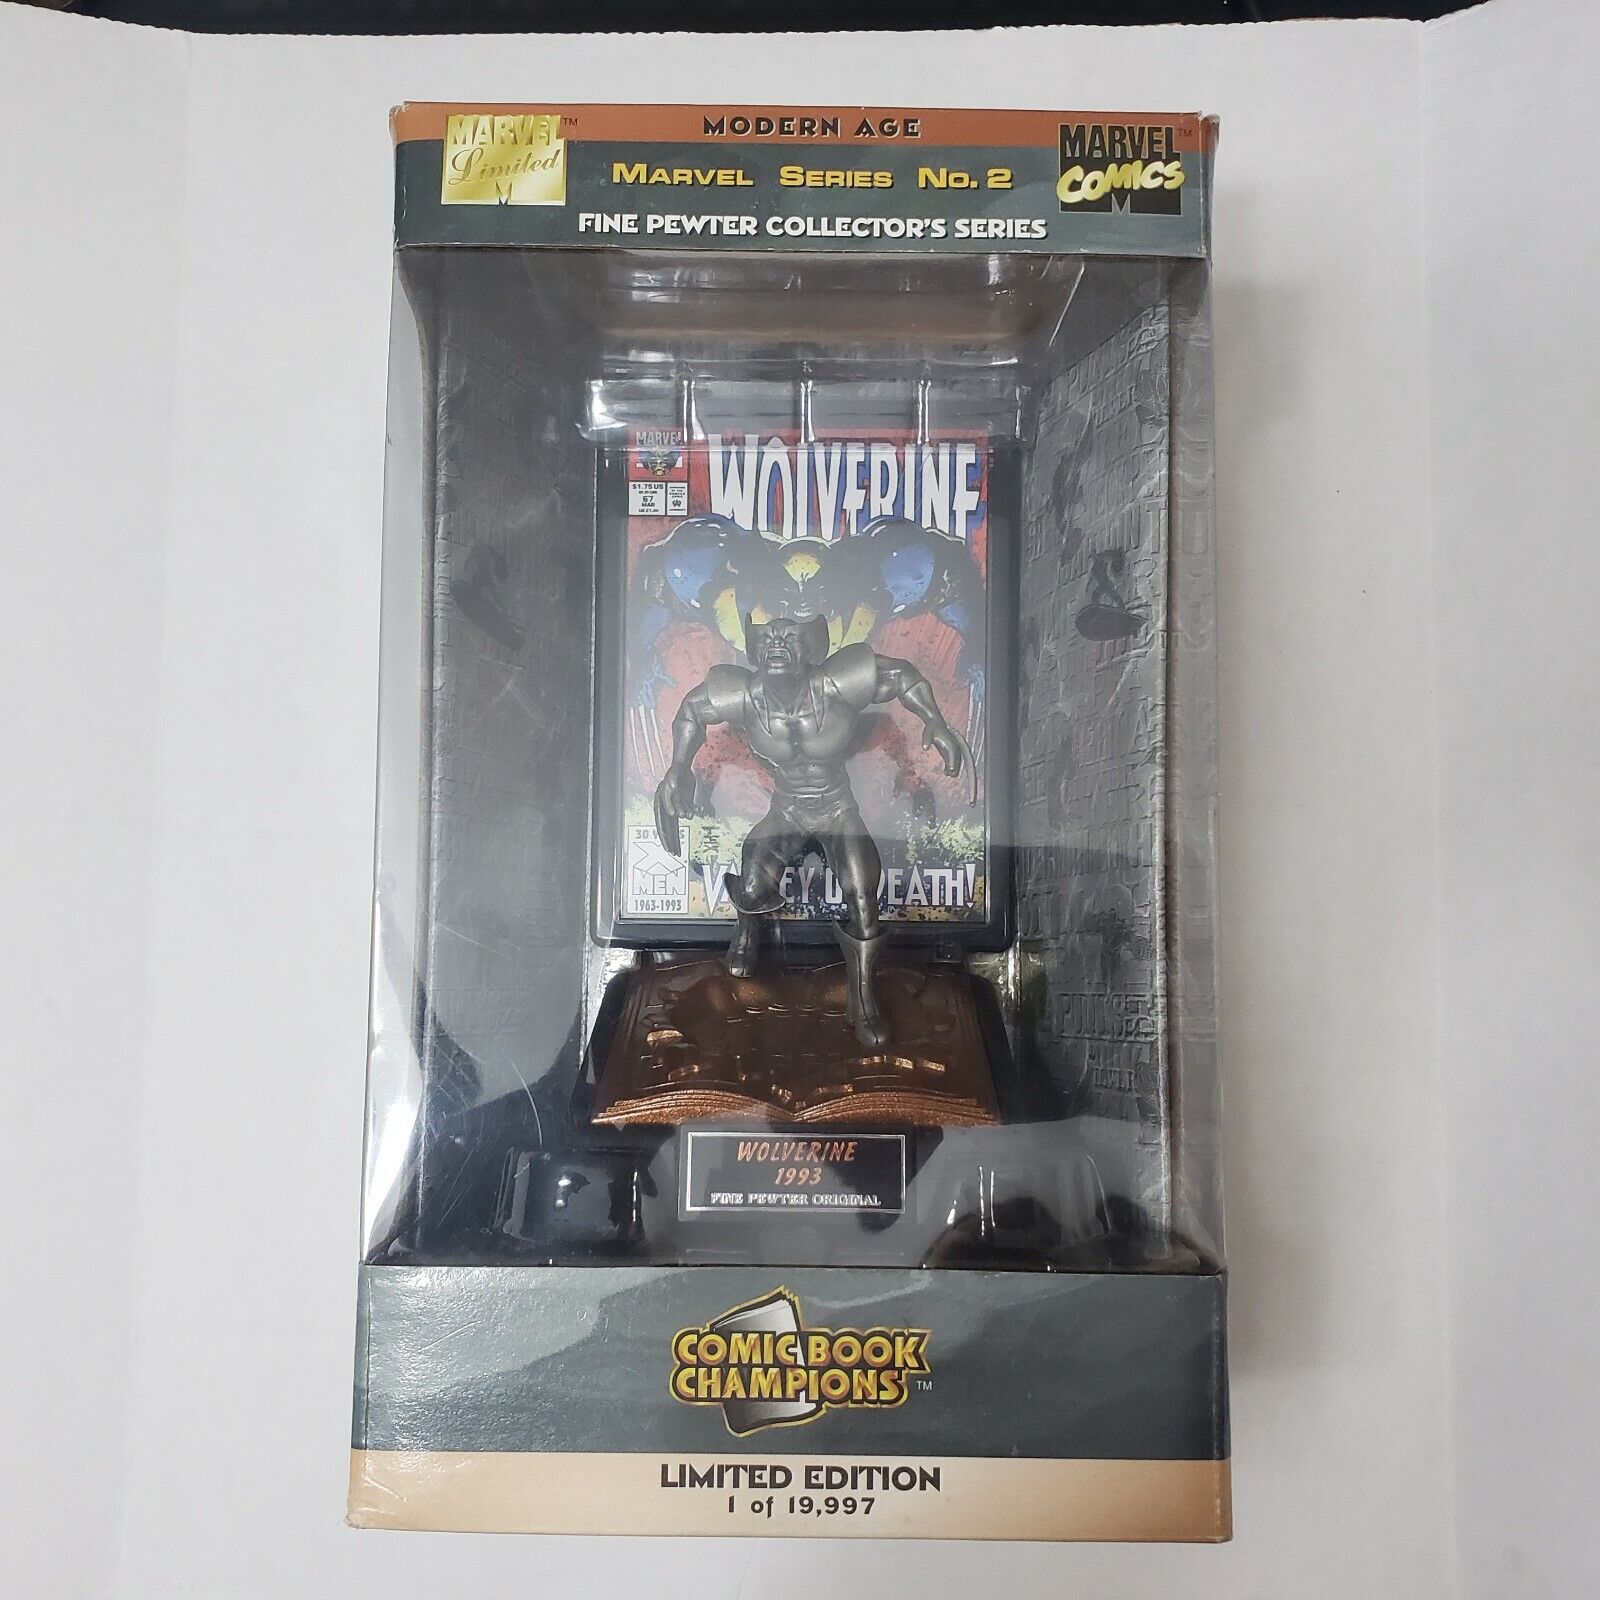 1997 Marvel Comic Book Champions Pewter Figure Wolverine Limited Edition